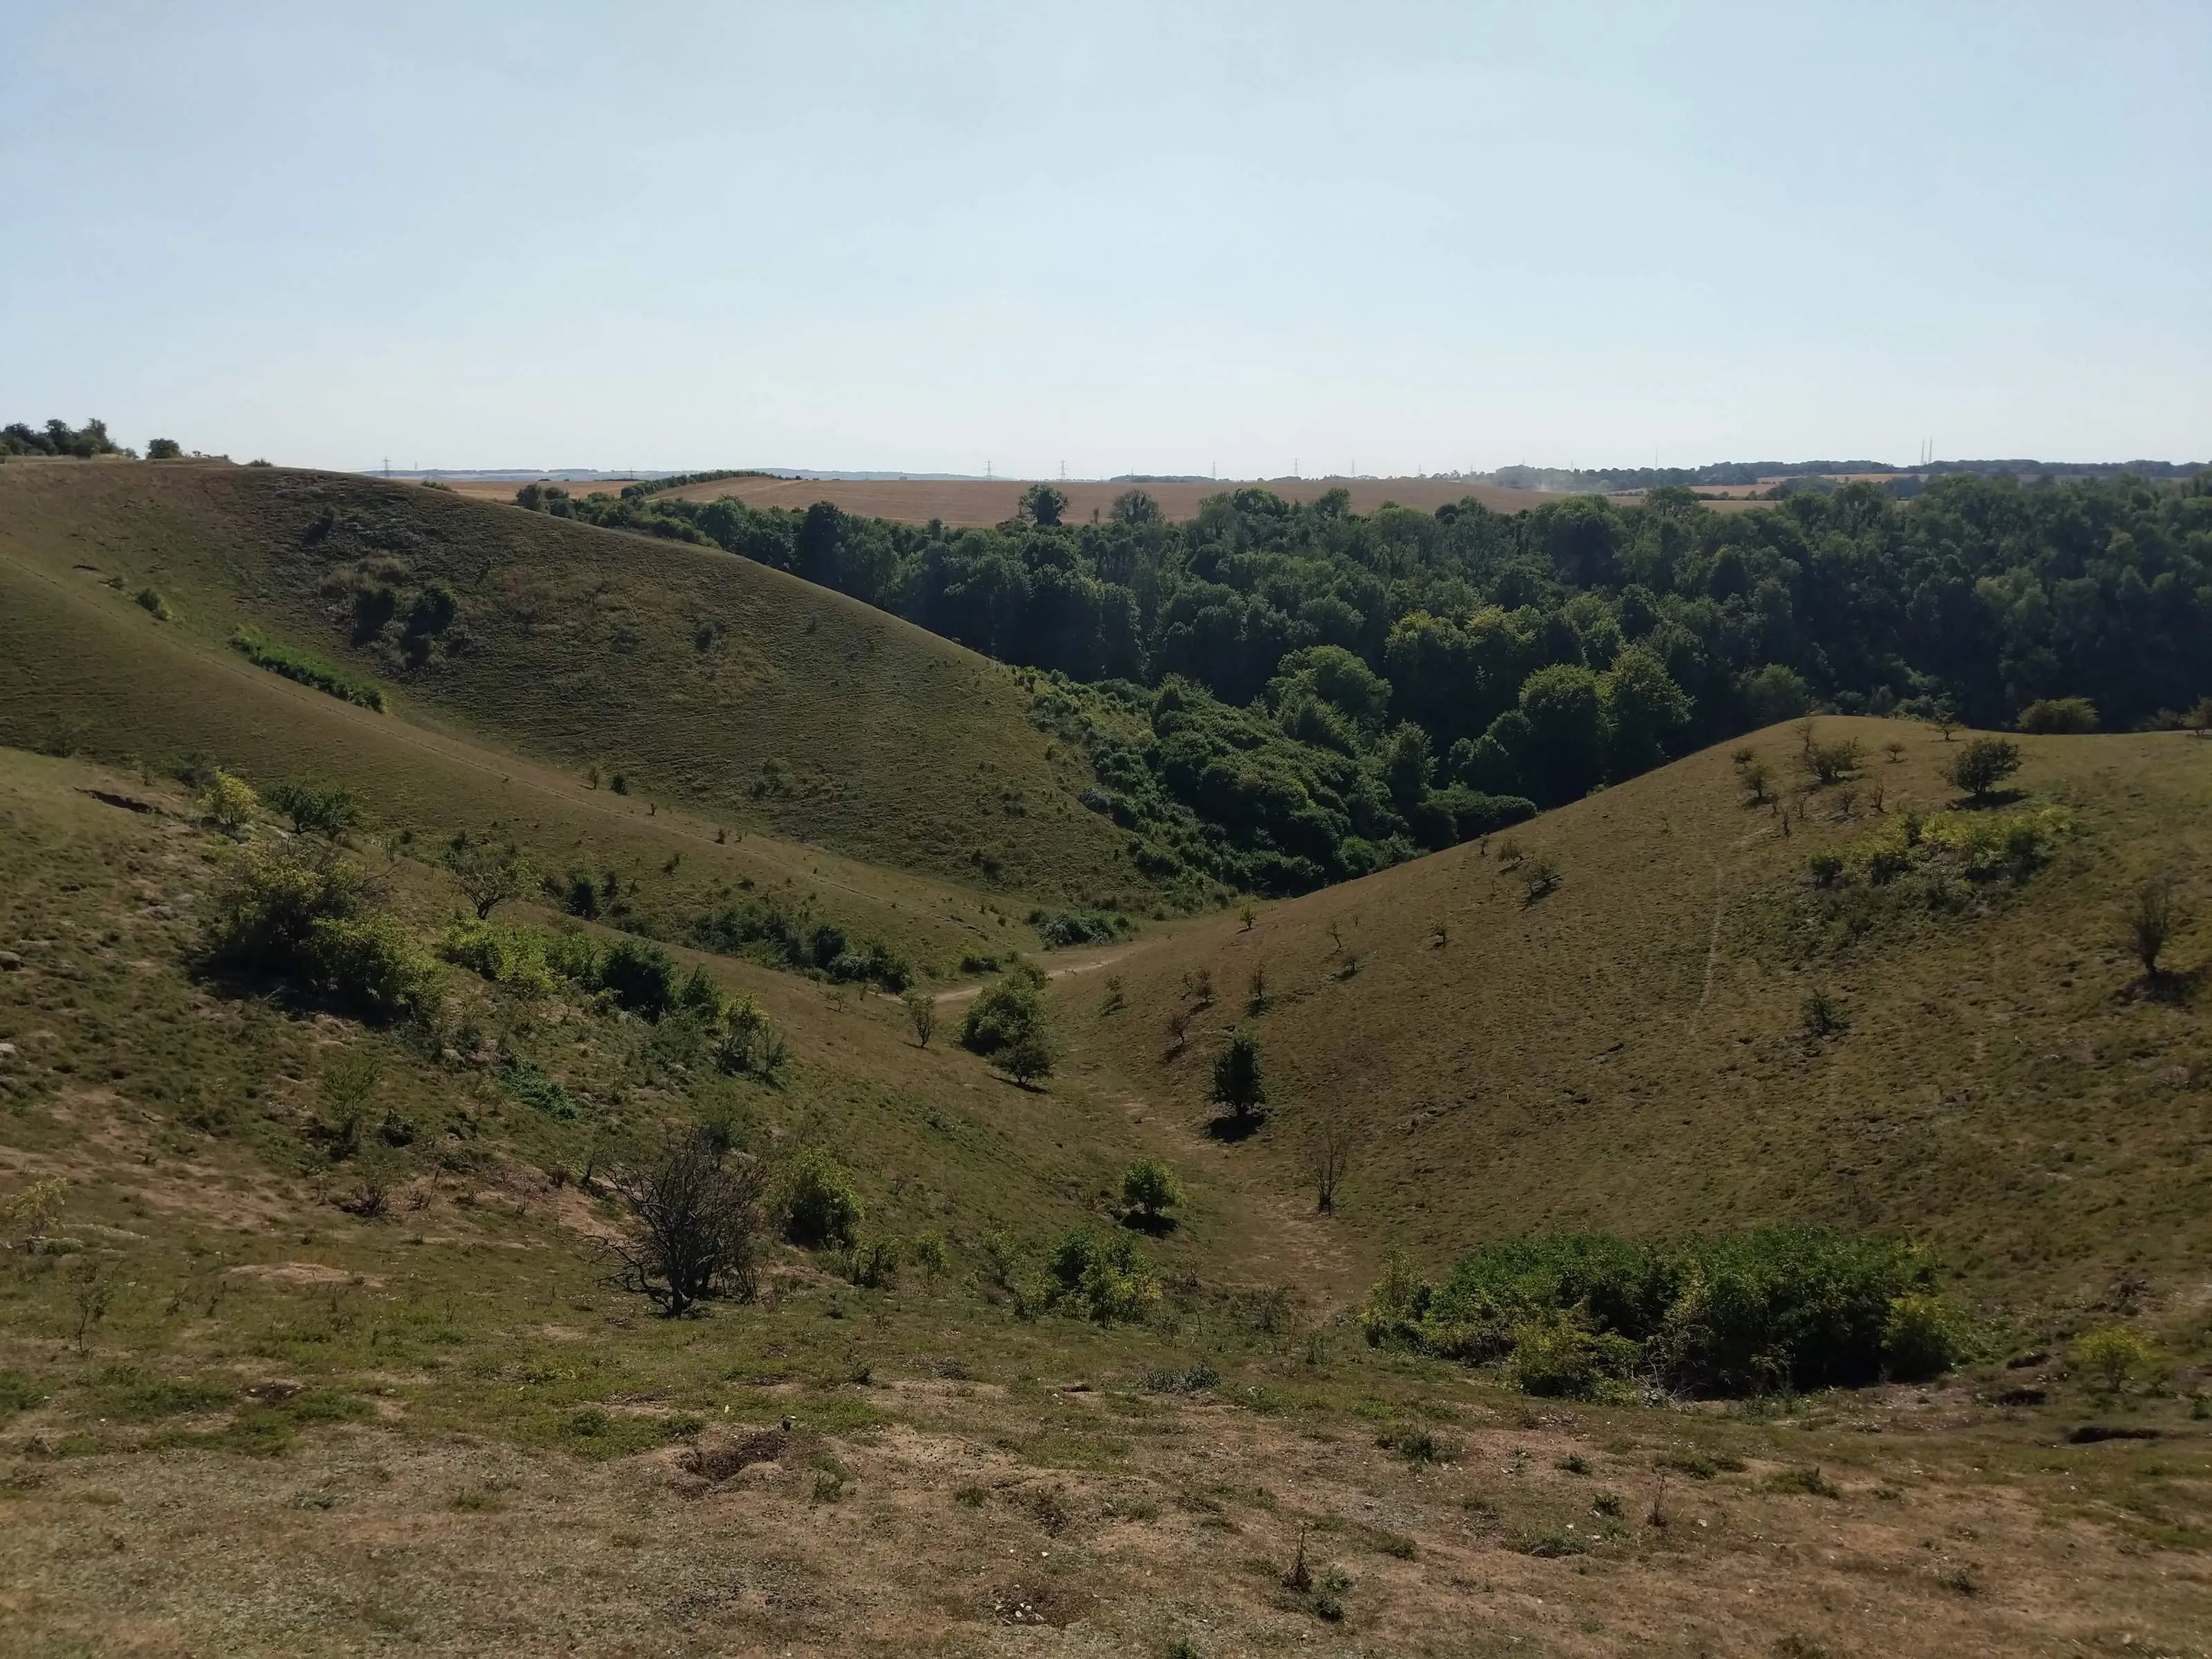 Looking down across Barton Hills. The landscape is formed from smooth,
rounded, but steep interlocking chalk hills. It looks suspiciously small, but a
sense of scale is given by the tiny trees dotted across the hills.